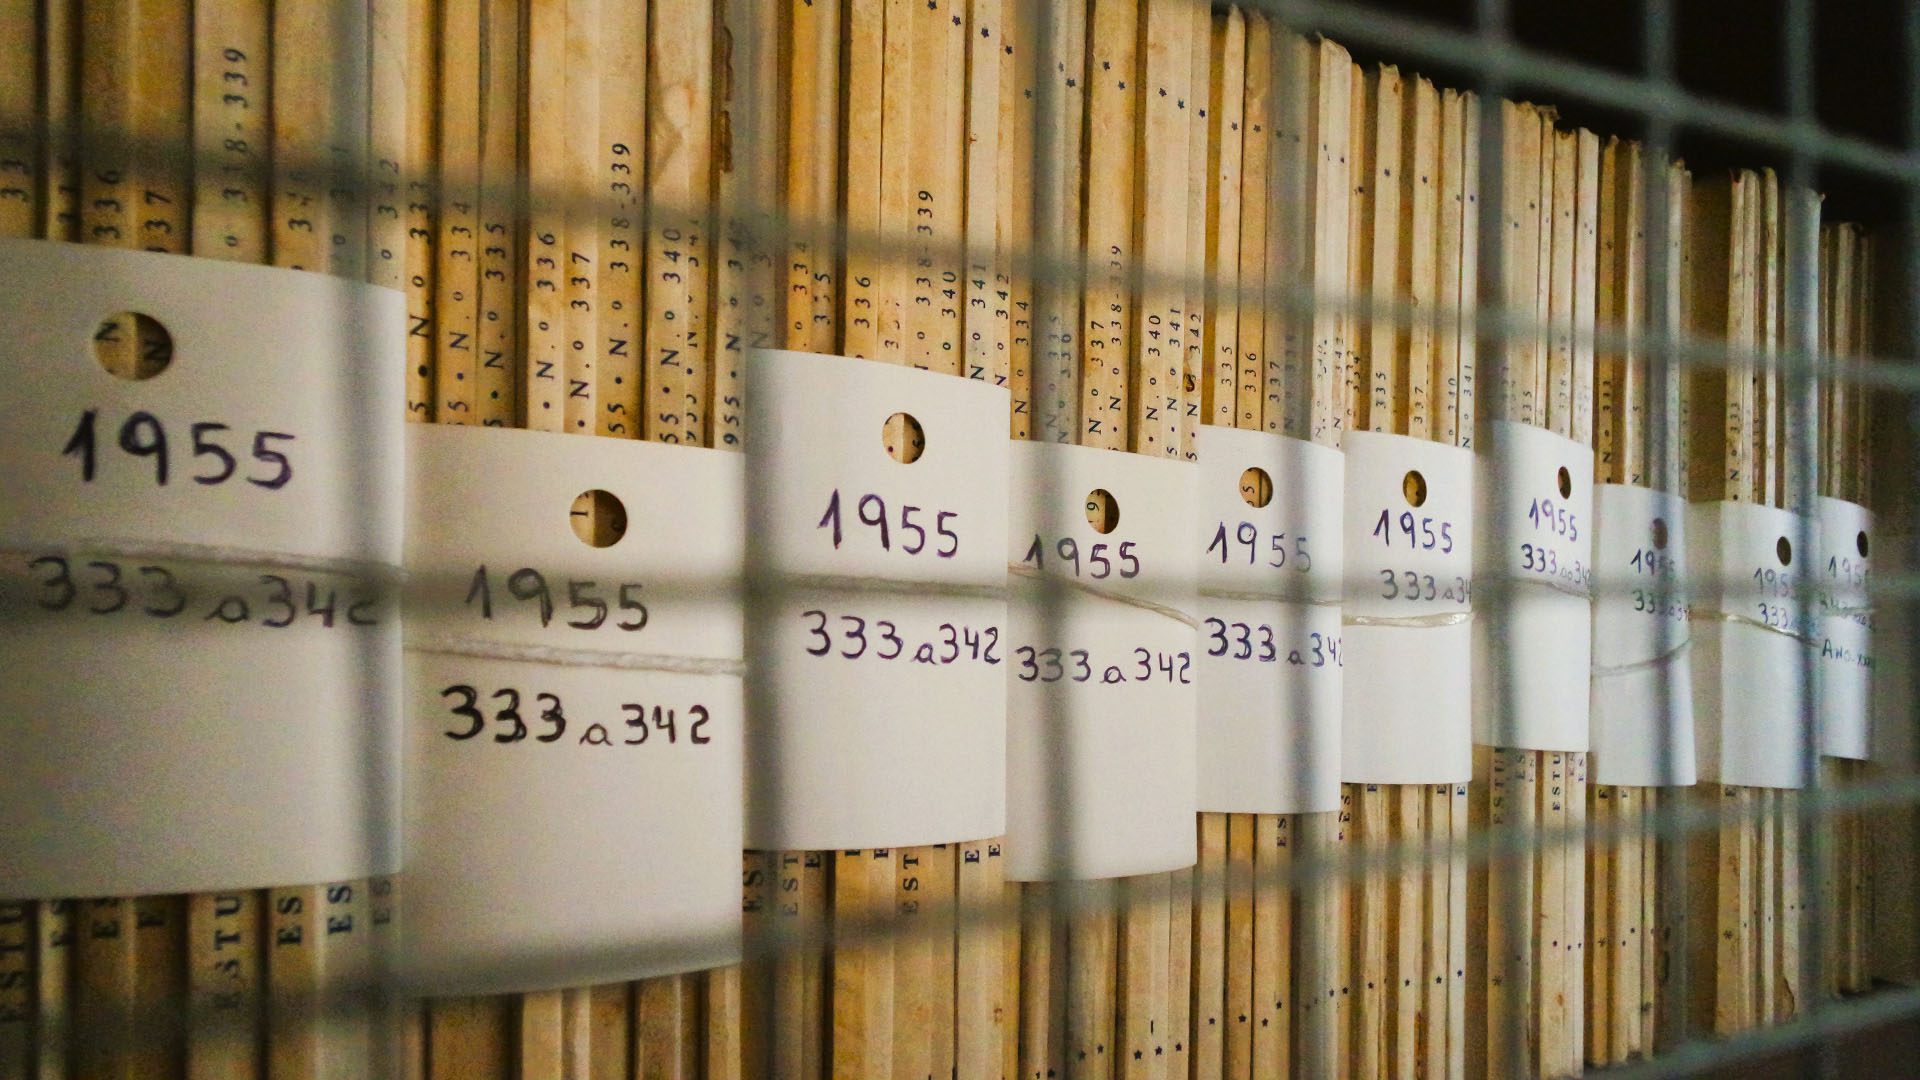 Historical Archives in Supporting Genealogy Research